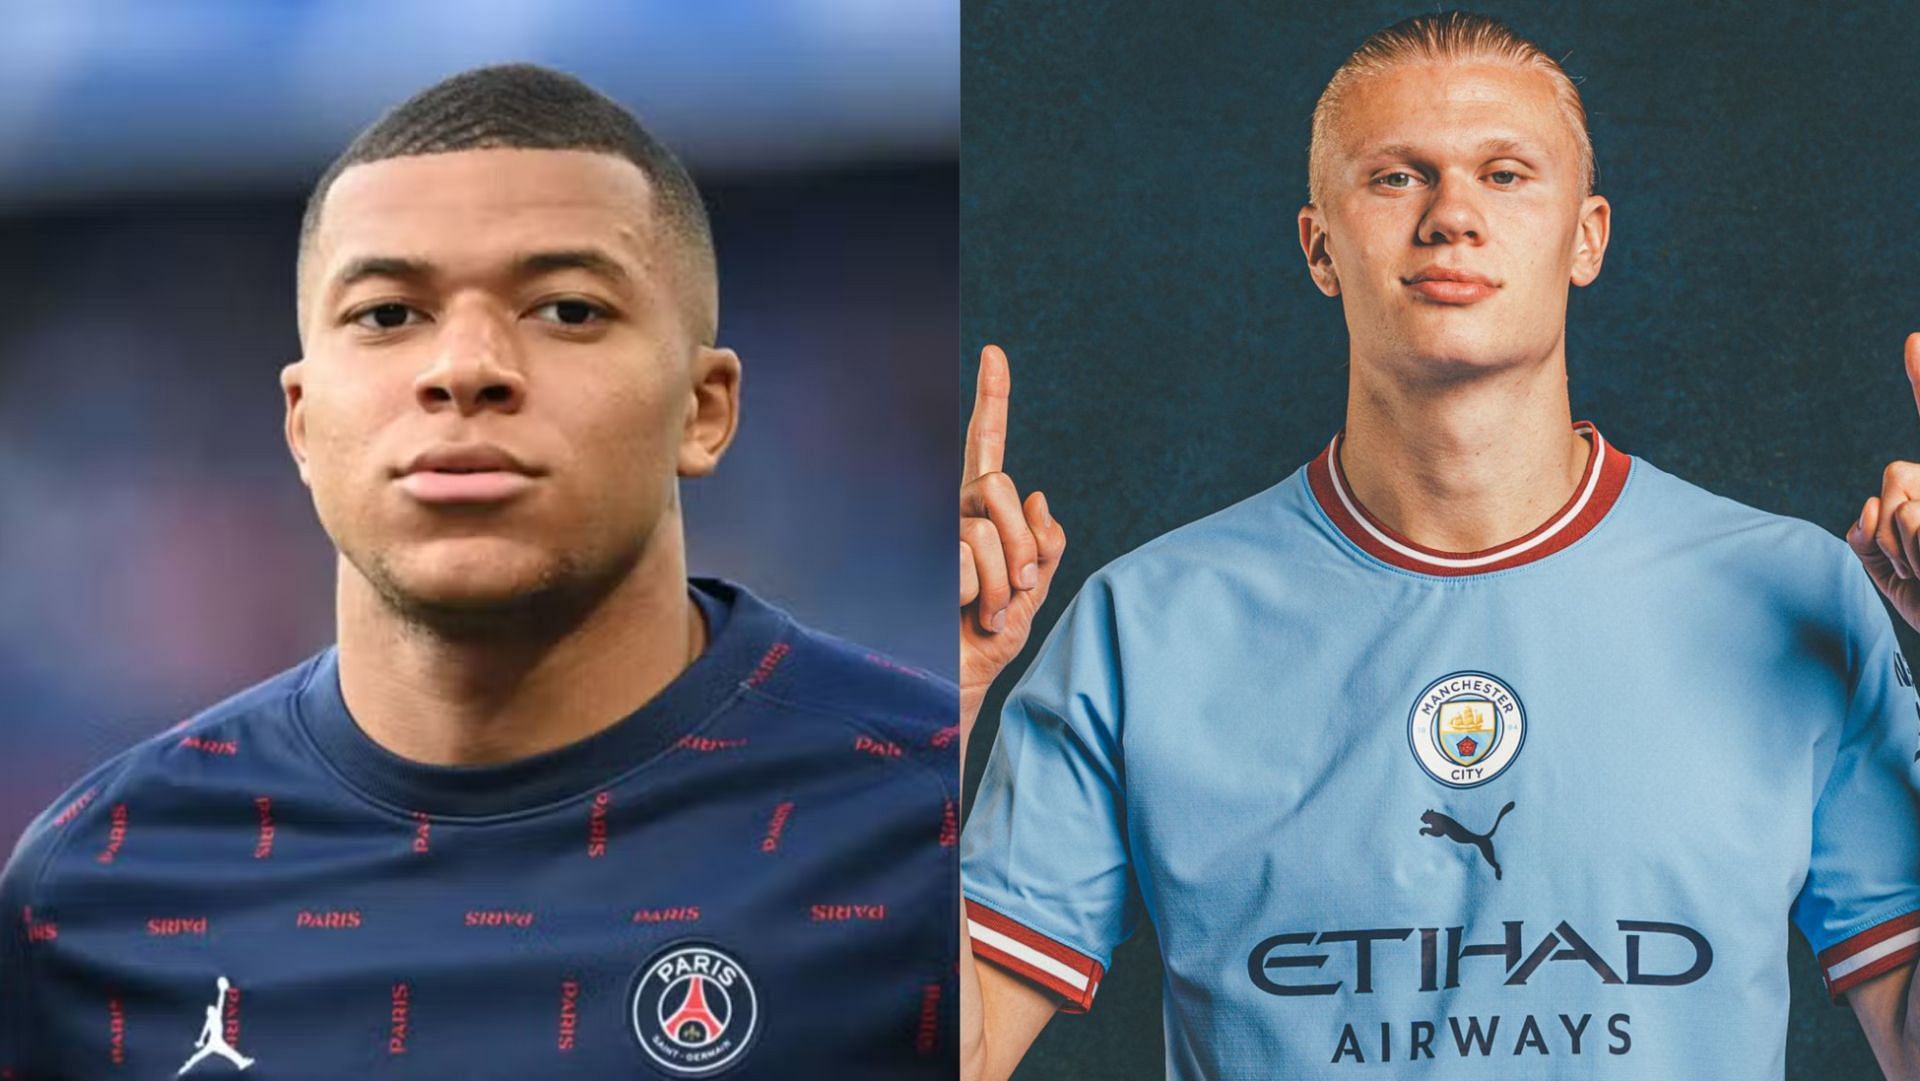 Erling Haaland and Kylian Mbappe will be among the best cards in FIFA 23 (Images via PSG, Manchester City)